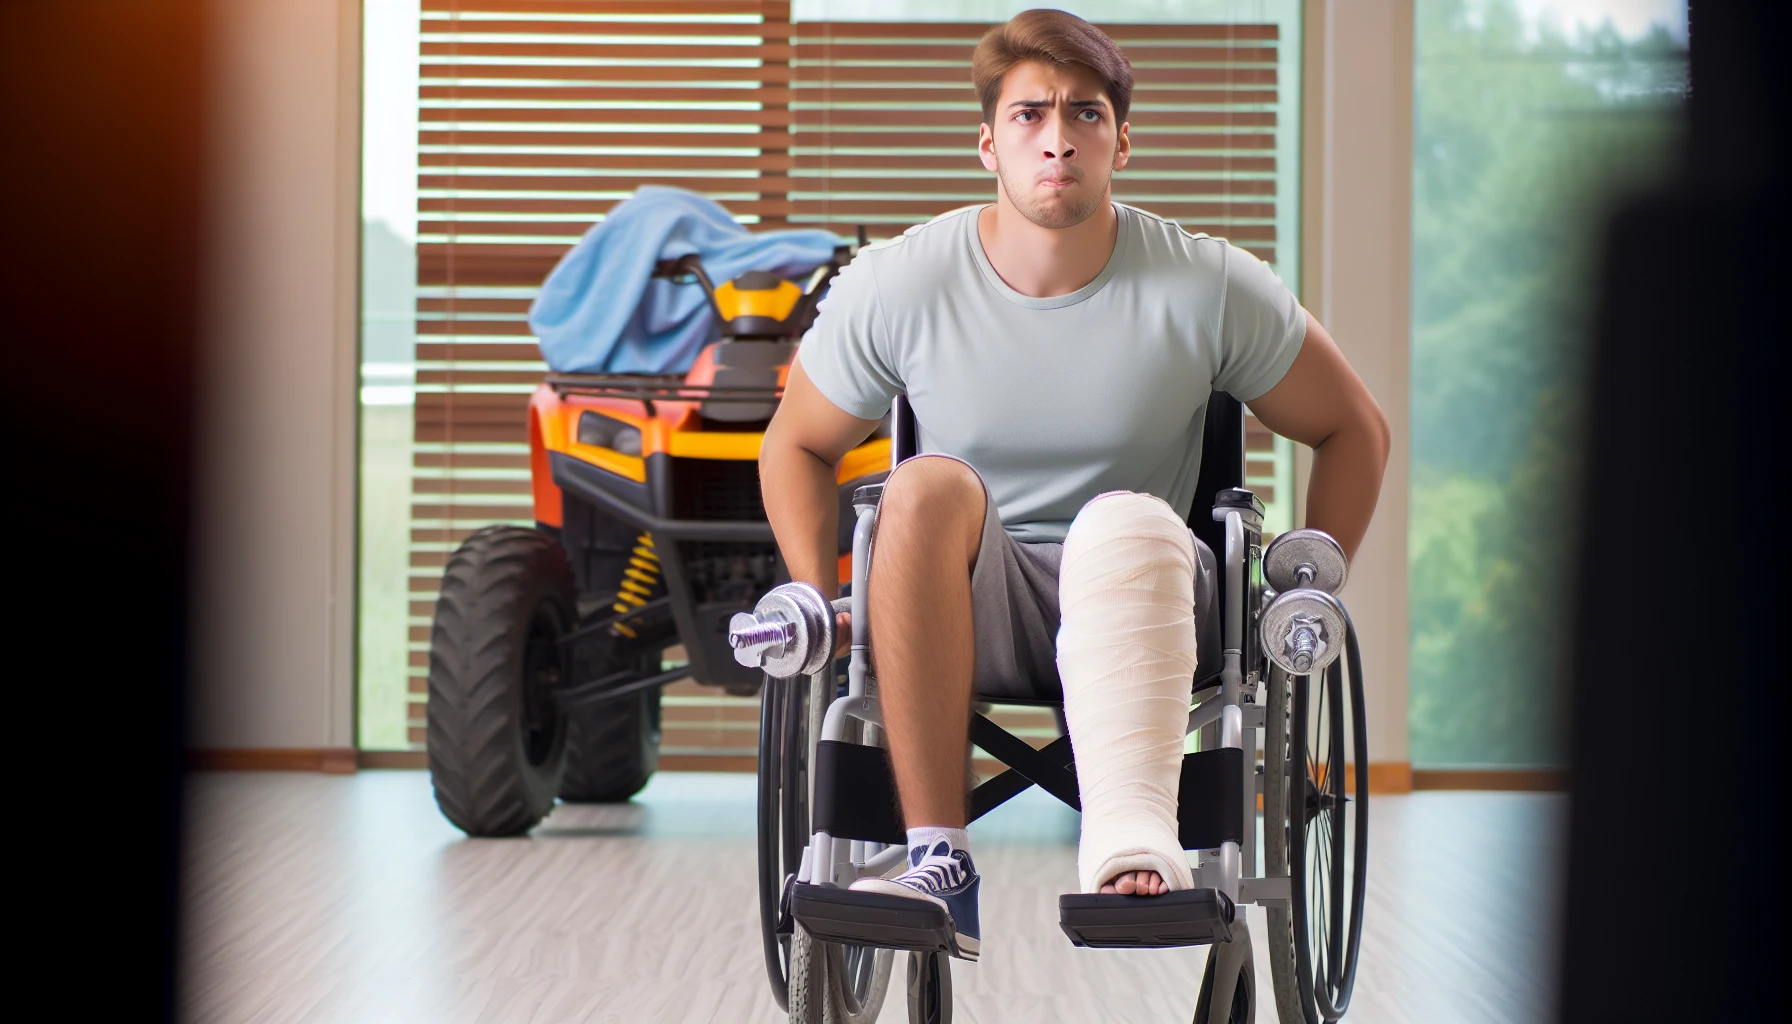 Rehabilitation after spinal cord injury